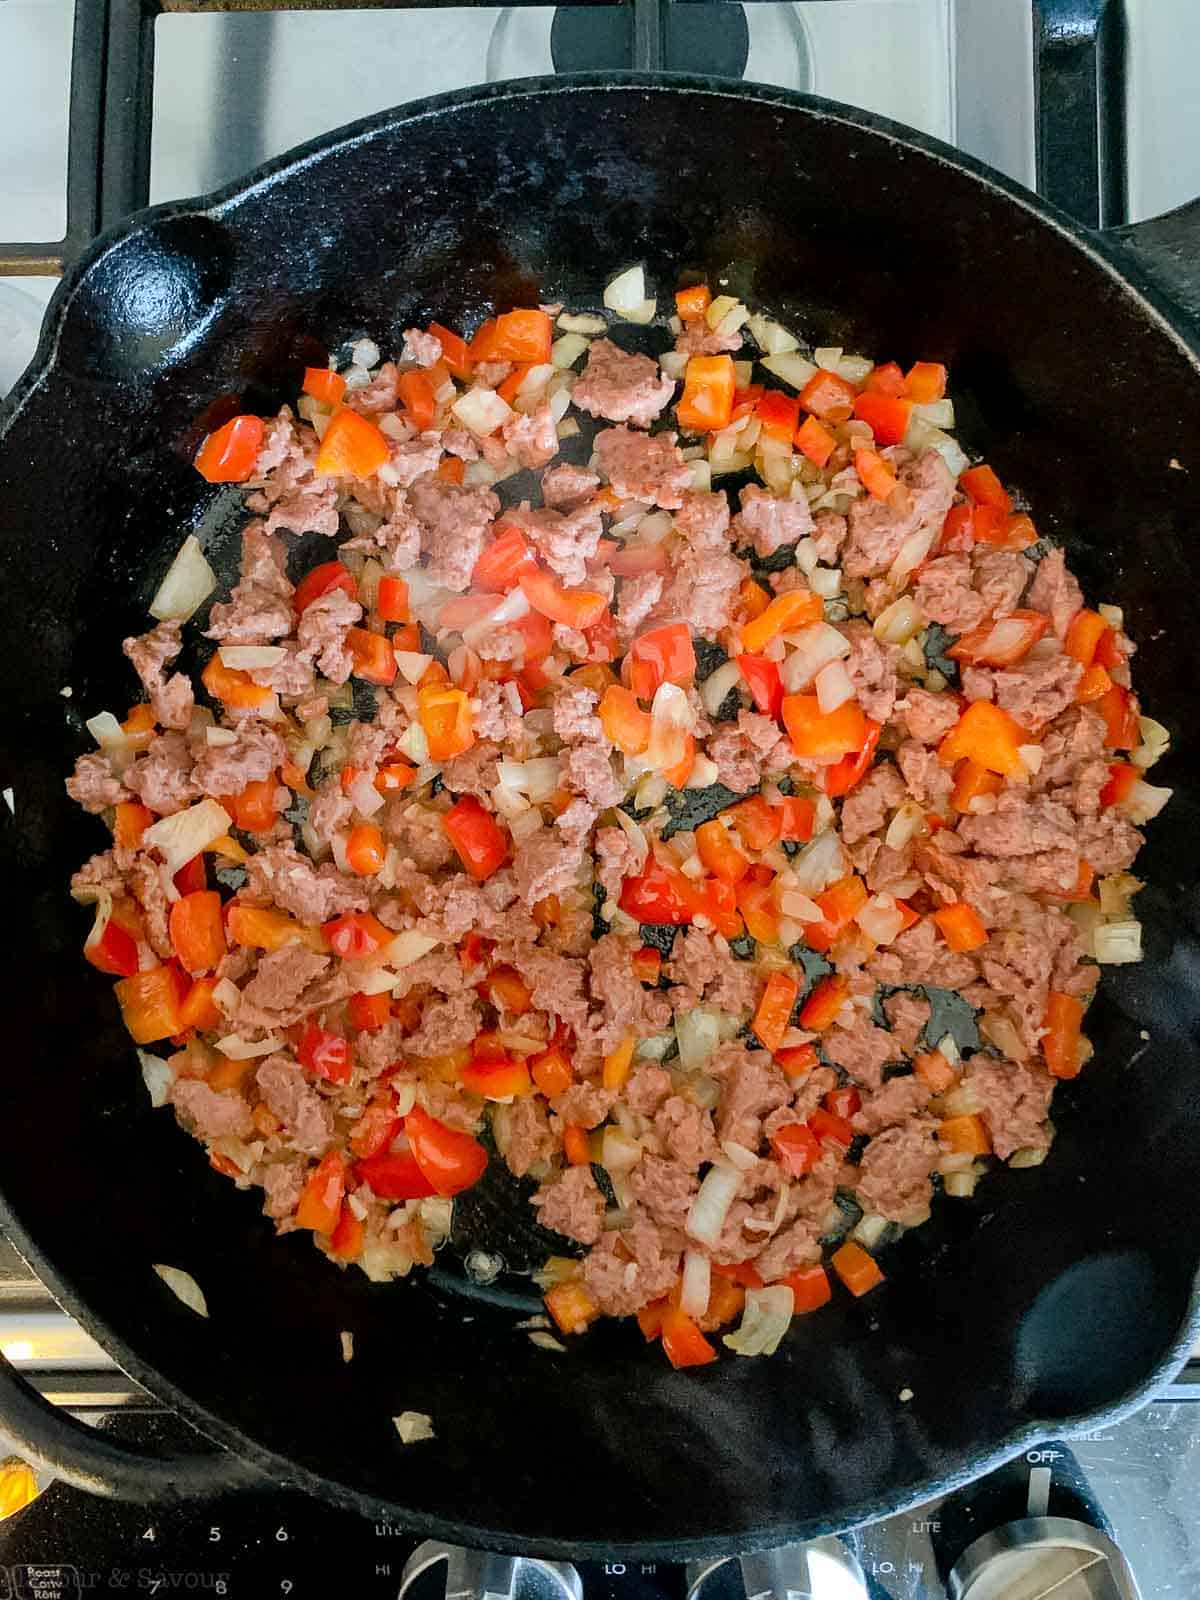 onions, peppers, garlic and plant-based meat in a skillet.